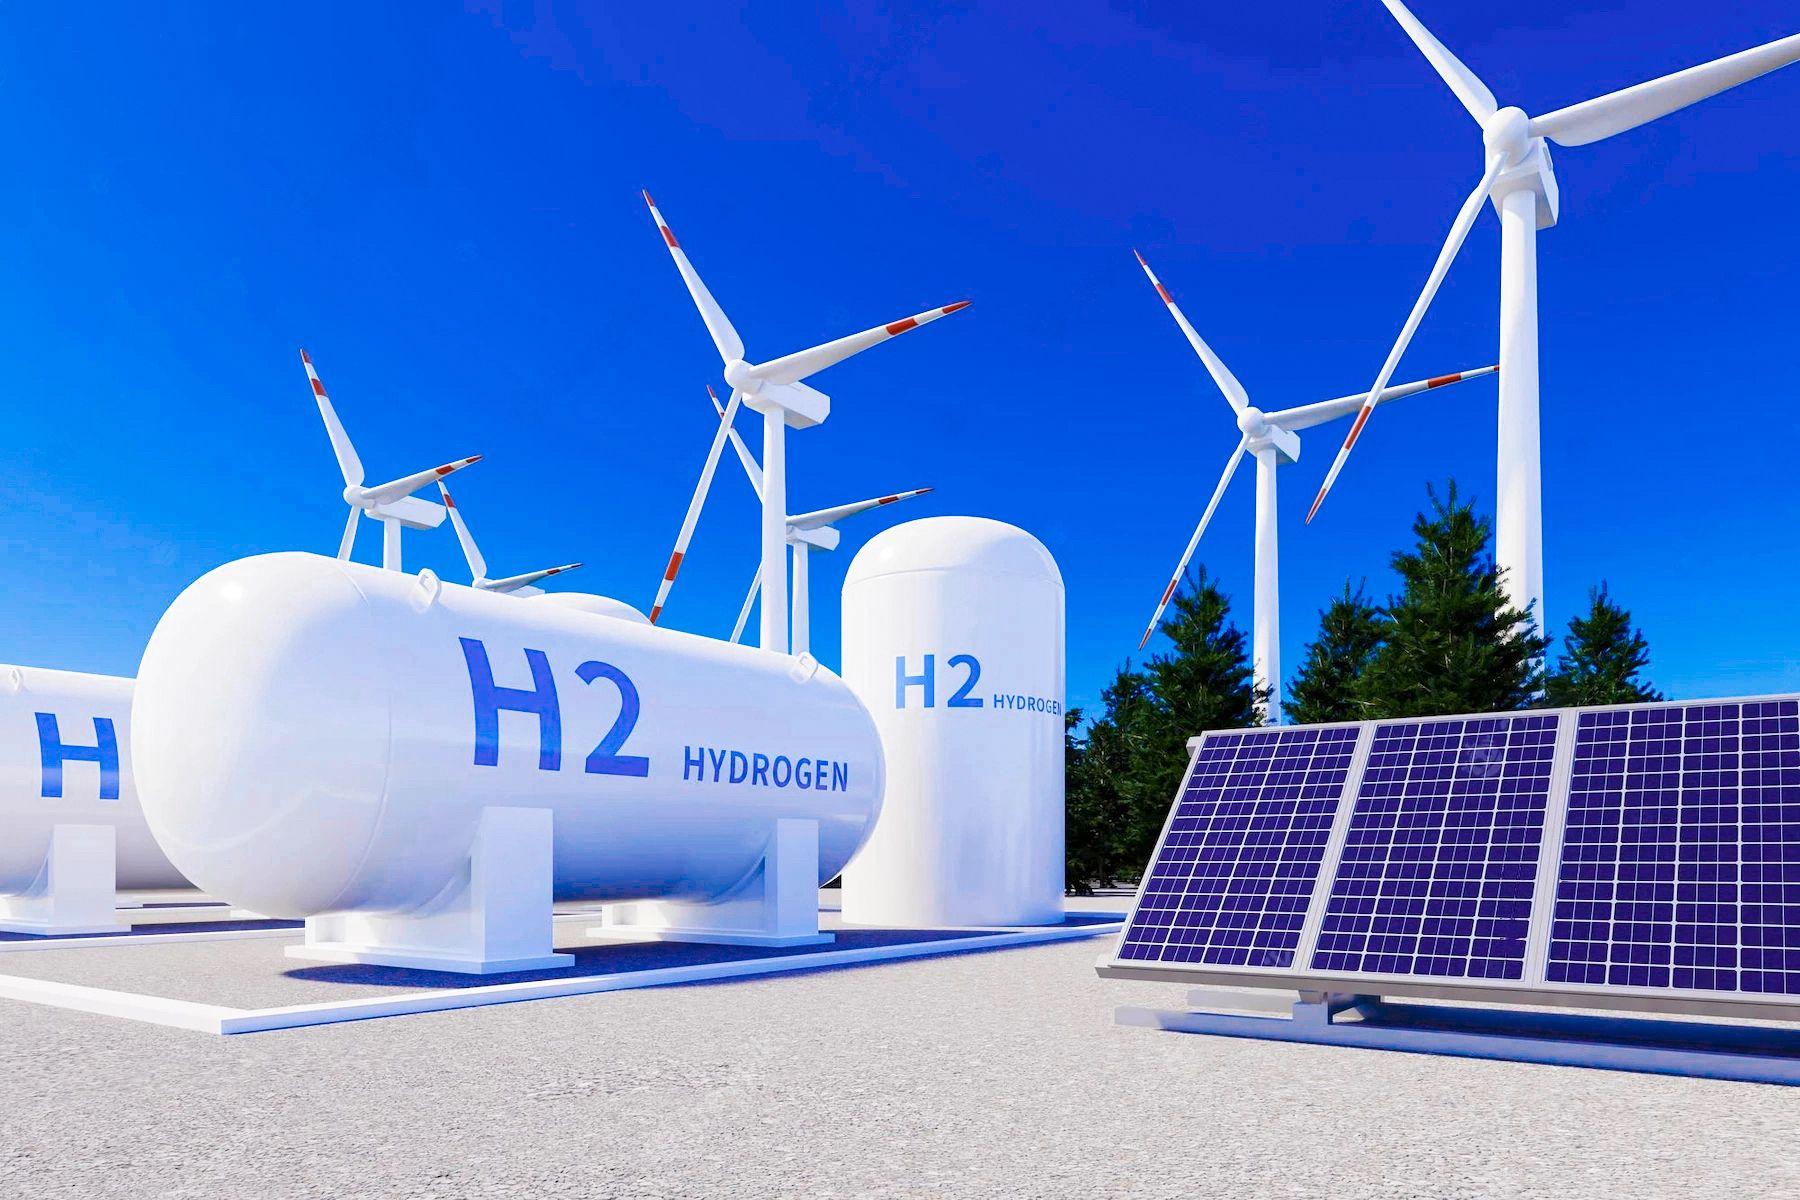 South Africa is making progress towards a massive green hydrogen facility 🇿🇦 